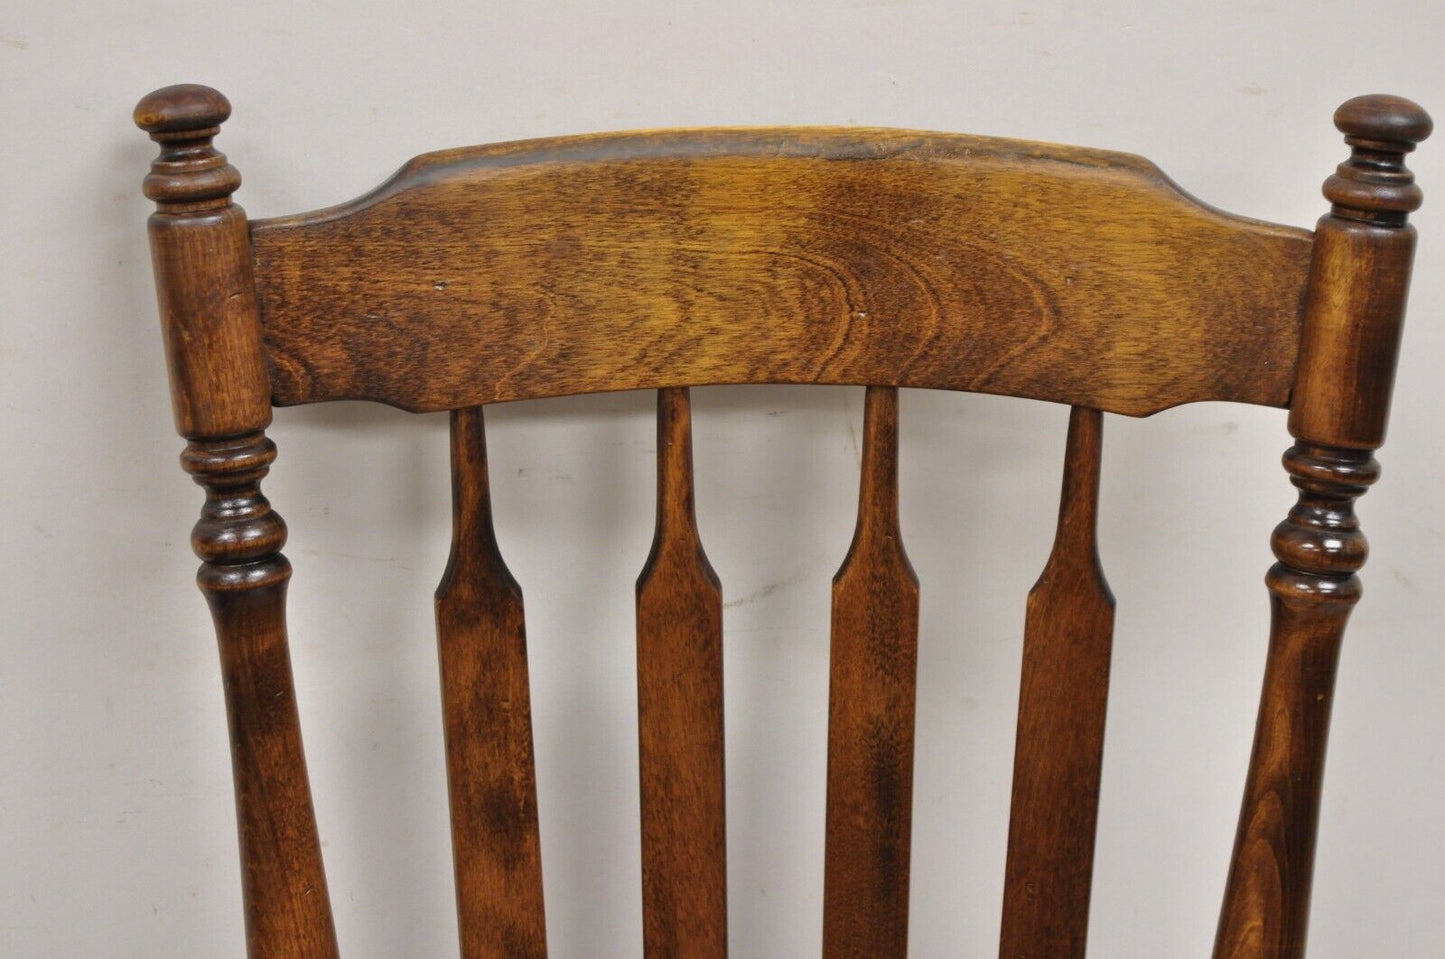 Ethan Allen Pine Wood Old Tavern Cattail Back Dining Room Chairs - Set of 6